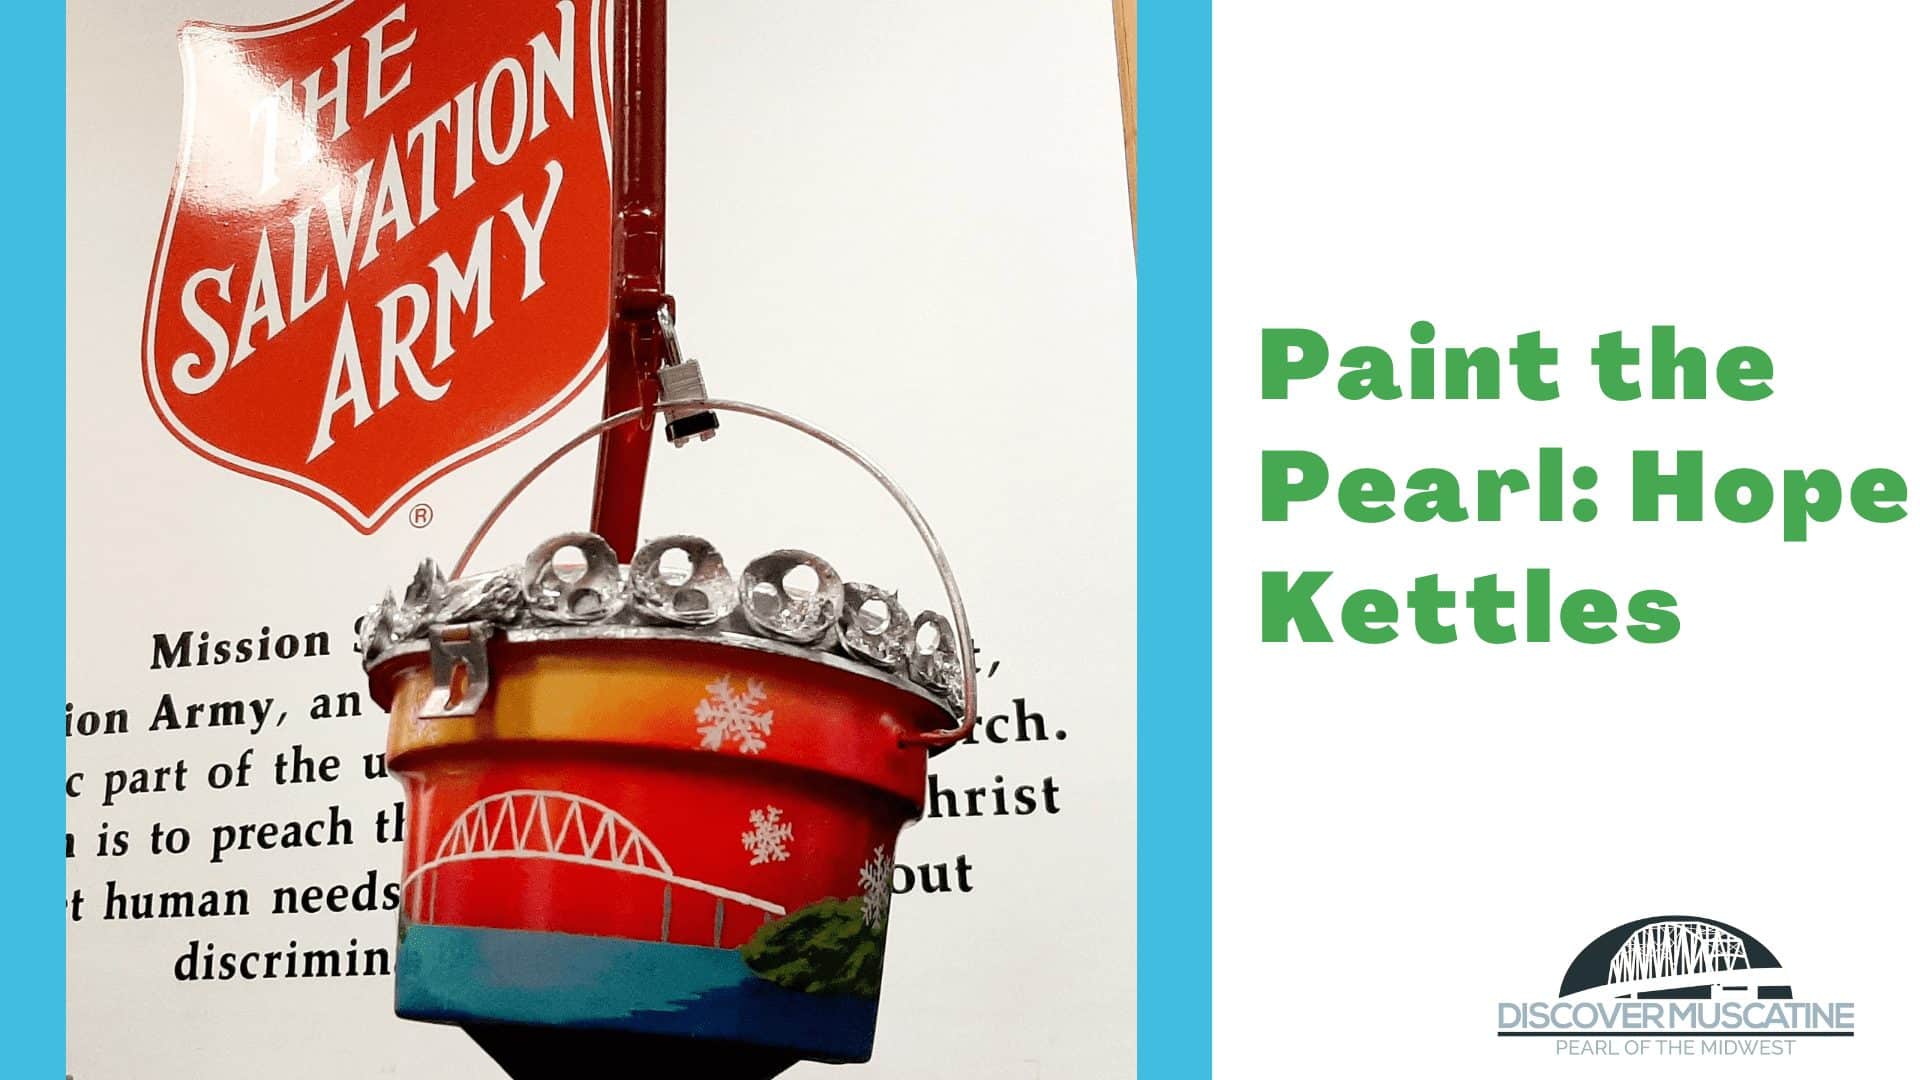 Paint the Pearl: Hope Kettles